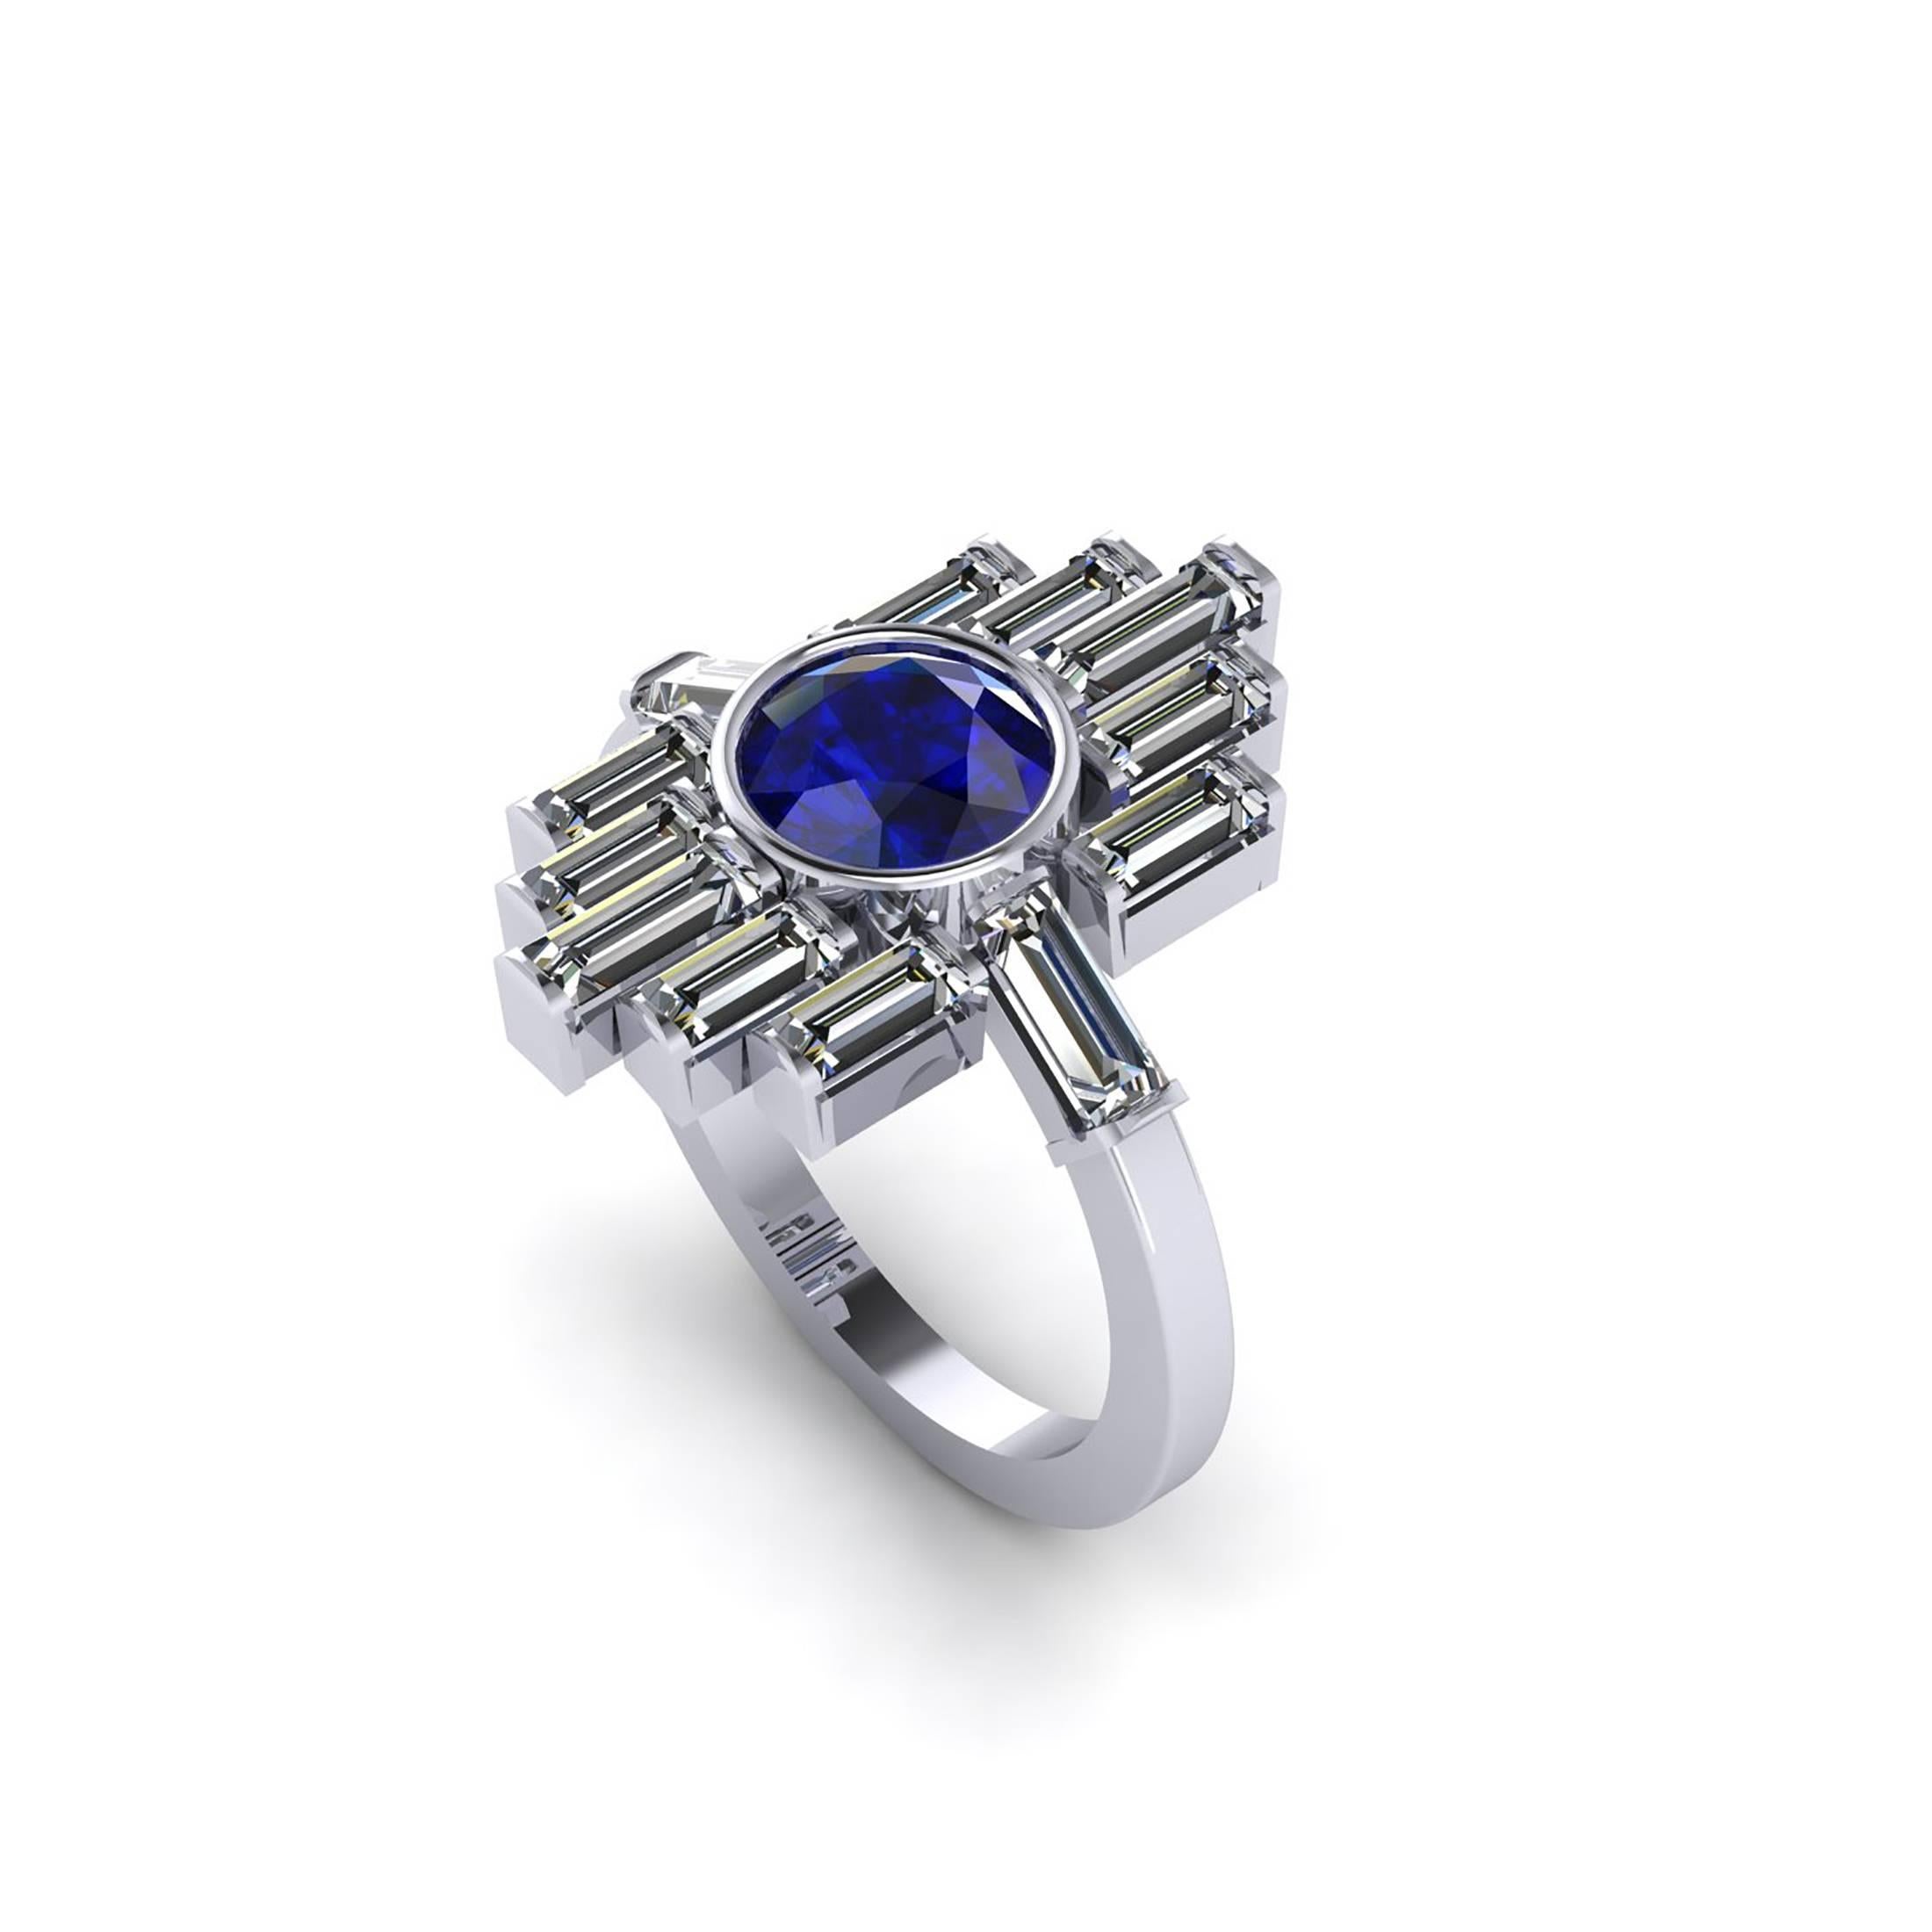 Ferrucci Art Deco design platinum Ring, hand made in New York by Italian master jeweler, showcasing a stunning  1.34 carats intense blue round Sapphire, embellished by bright white diamond baguettes for an approximate 1.65 carats, in a low setting